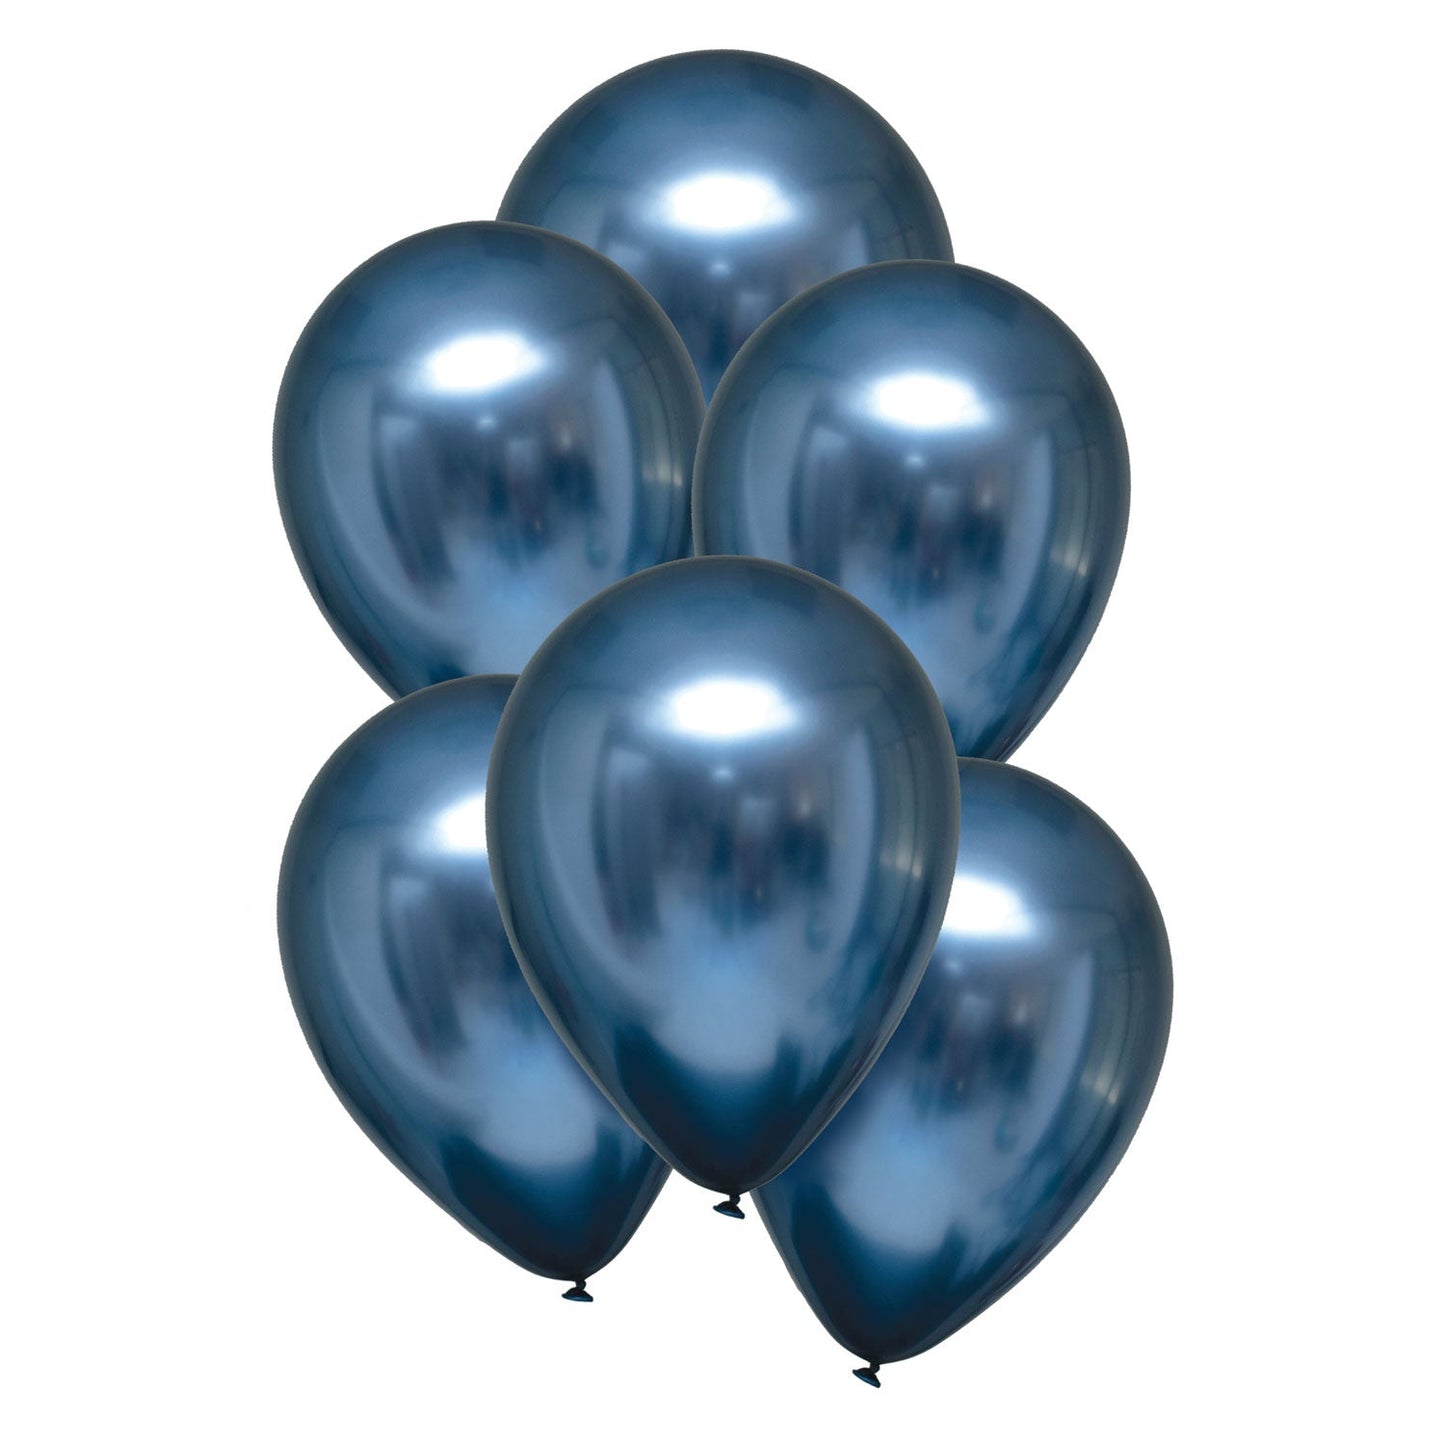 Azure Satin Luxe Latex Balloons. Will inflate up to 27cm. Suitable for Air fill or Helium fill.